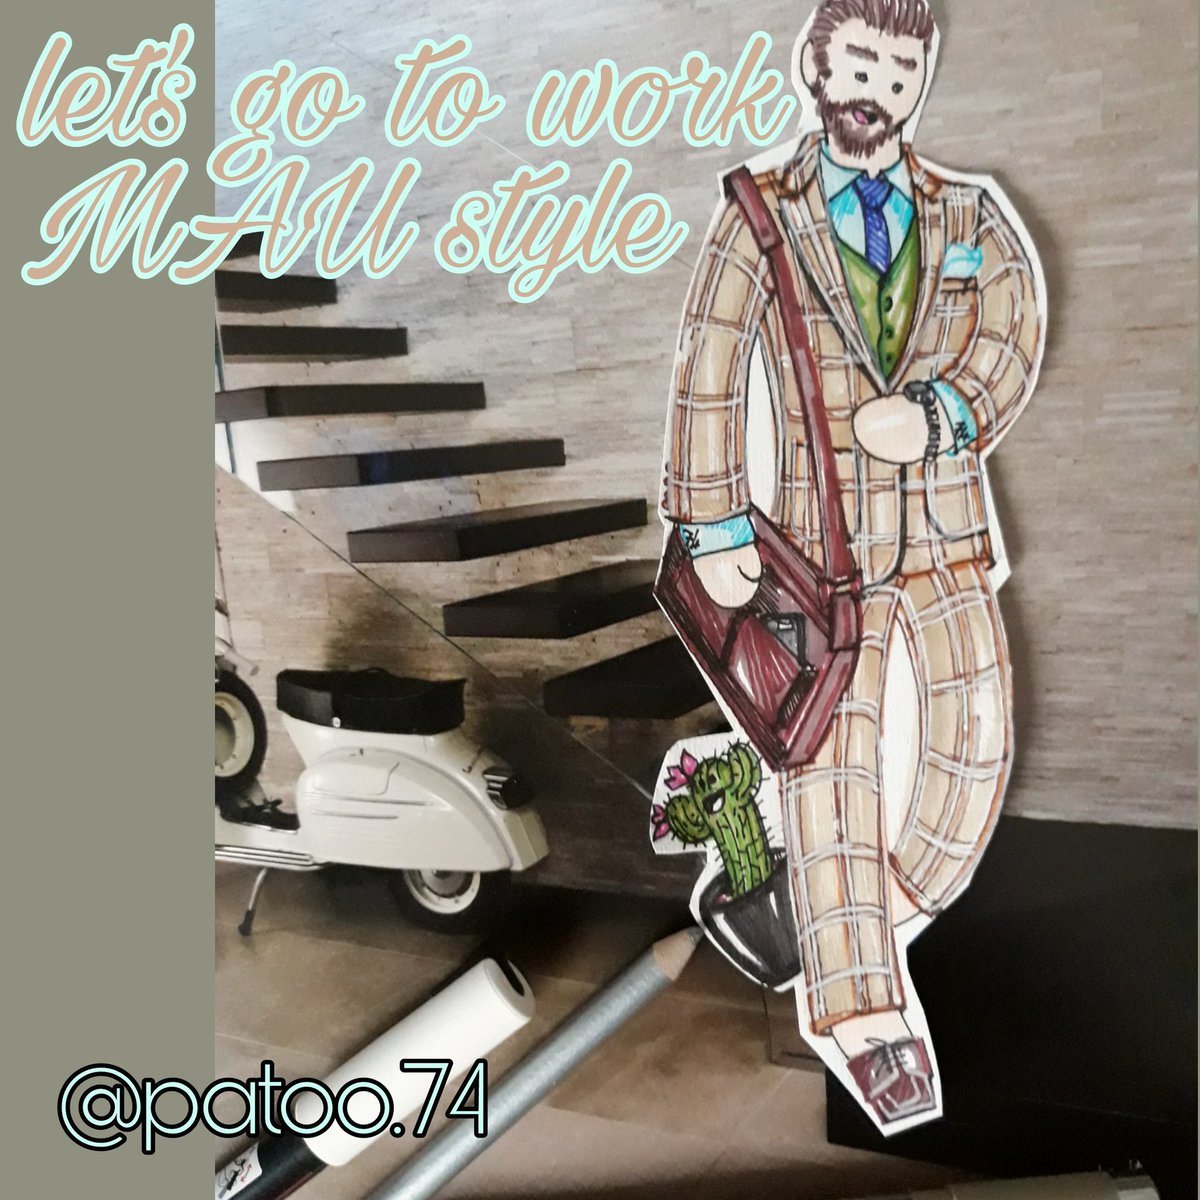 Outfit'let's go to work!!'🤓MAUstyle🇮🇹#mensblogger #suiting #sartoria #menstyle #bespoke #tailored #classicstyle #dandy #pittiuomo #gq #luxuryfashion #luxurystyle #luxurylifestyle #dapper #gentlemanstyle #gentleman #manwithstyle #style #illustration #ootdmen #